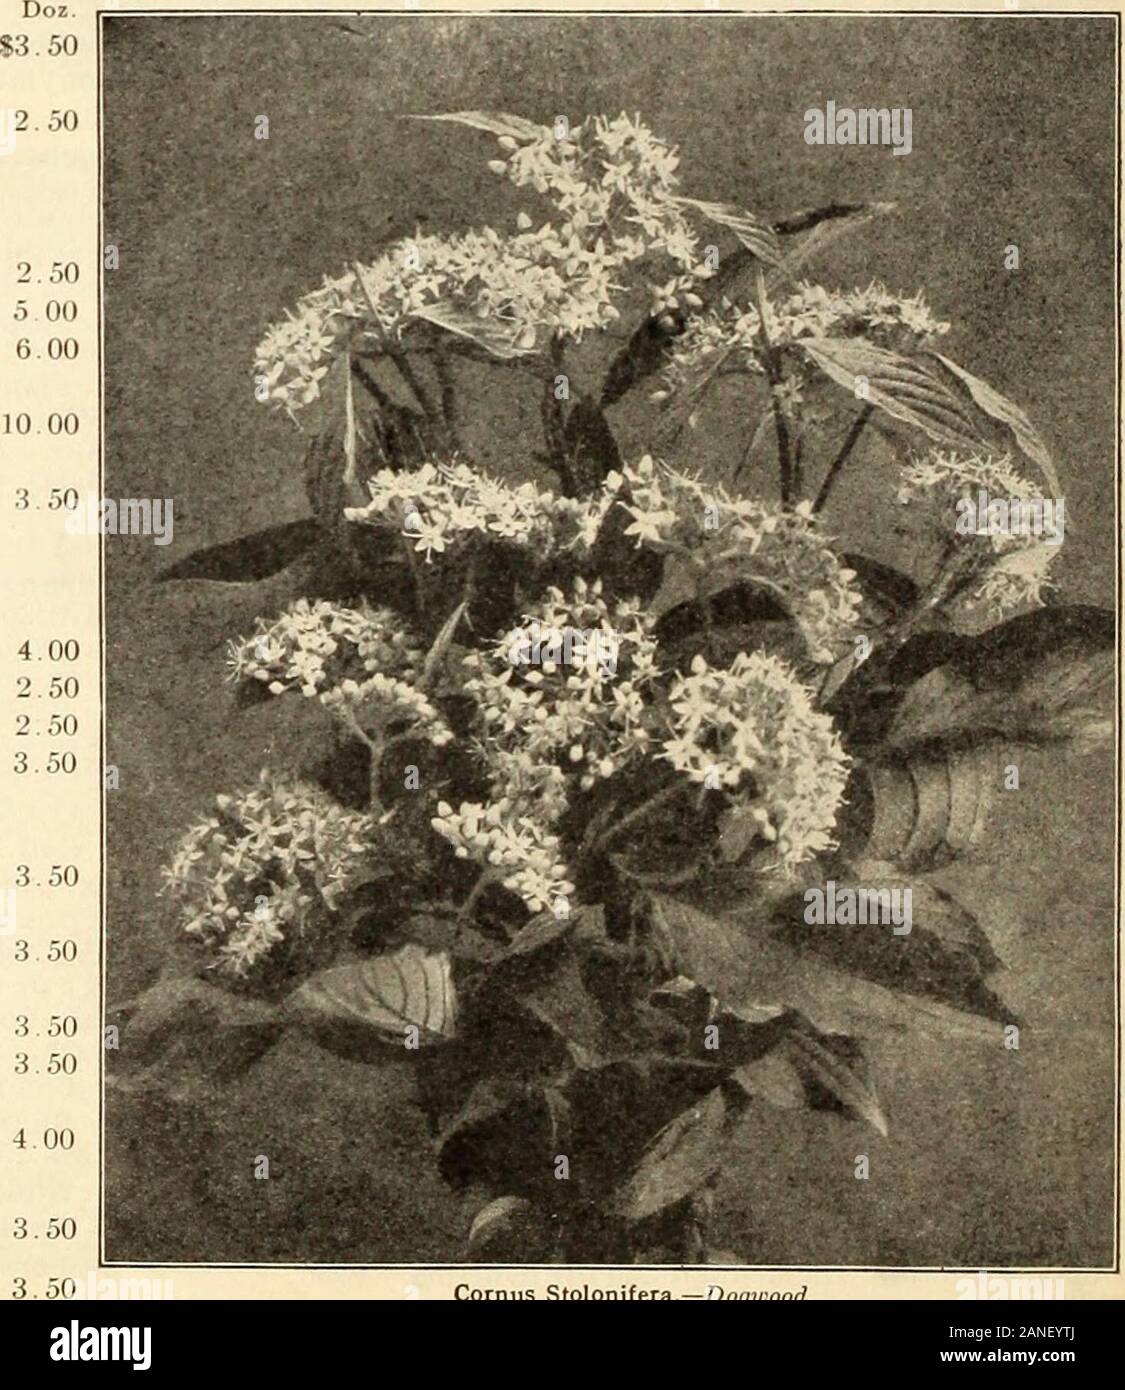 Farquhar's 1910 garden annual . May. Each, .35 — Bumaldi. A dwarf Japanese variety of vigorousgrowth. Flowers pink; July. Each, .35 ... — eallosa. Deep ro.se, grows freely, and flowersnearly all summer. Each, .35 alba. White. May. Each, .35 — Anthony Waterer. Brilliant rosy carmineflowers in dense clusters. Each, .40 — opulifolia. Strong growing shrub, with whiteflowers along the stems. Useful for screening pur-poses. Each, .35 ... ... ... ... ... aurea. White flowers in clusters; golden foliage; May. Each, 35 . . Doz..S4. 00 7.50 3.50 3.50 Spirea prunifolia flore pleno. SrWai Wreath. lite; ve Stock Photo